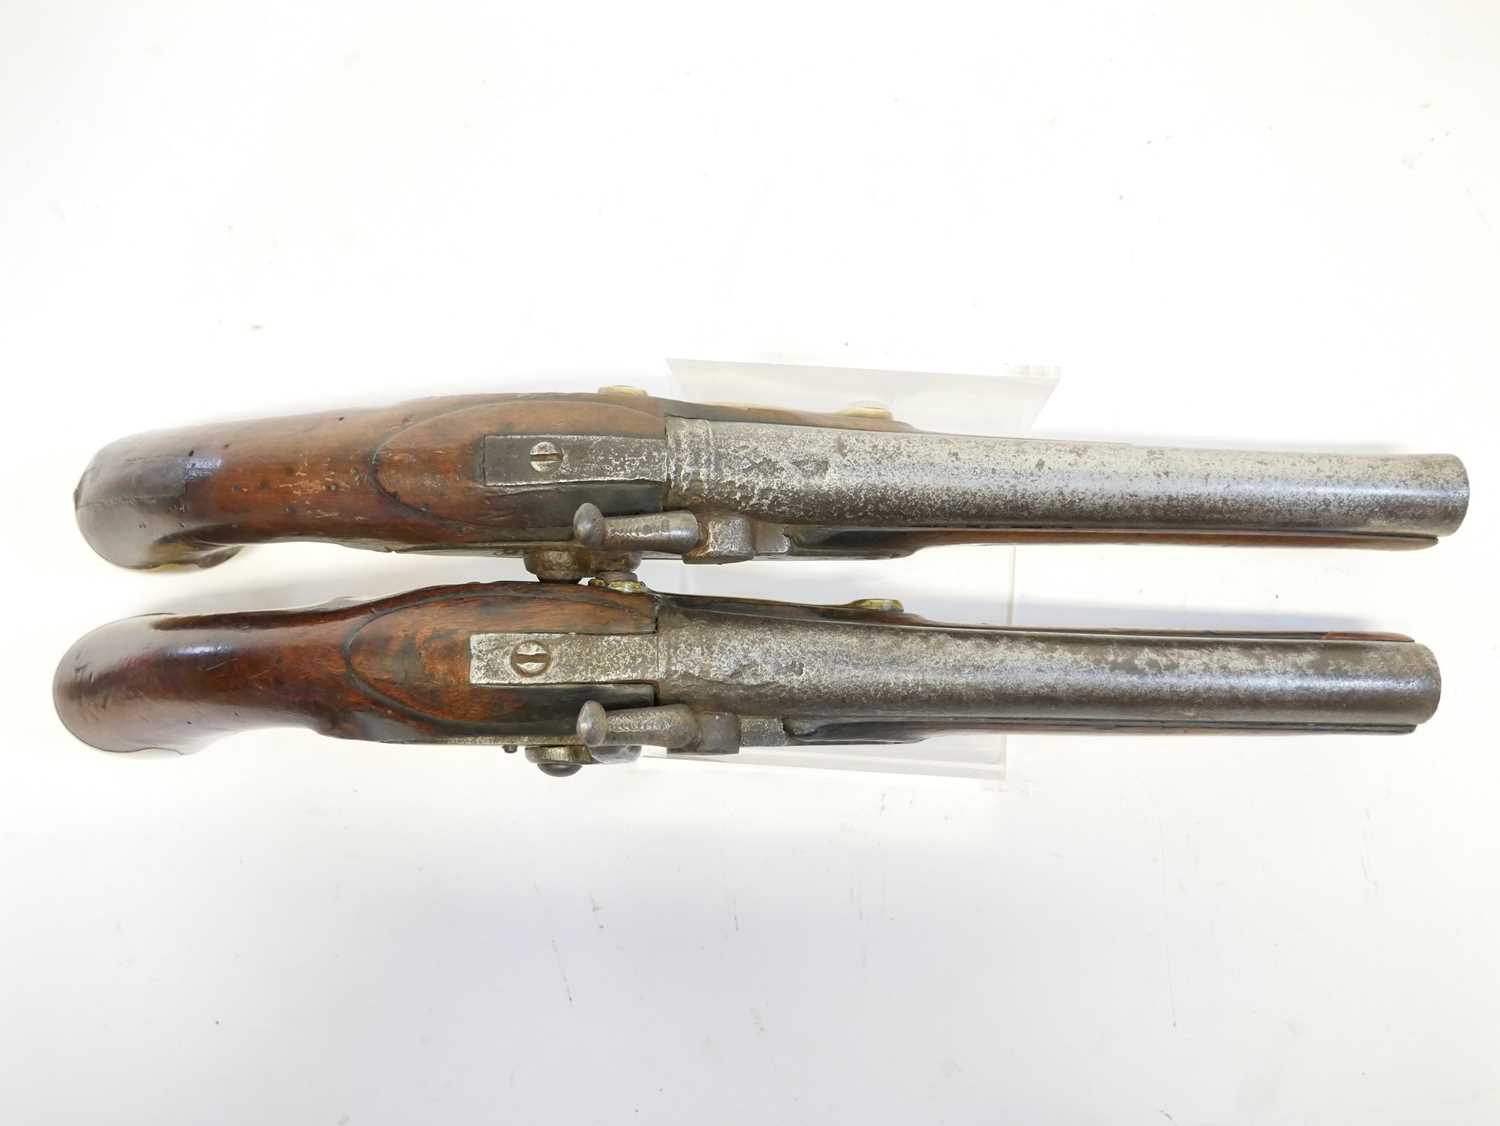 Matched together pair of percussion pistols - Image 9 of 11